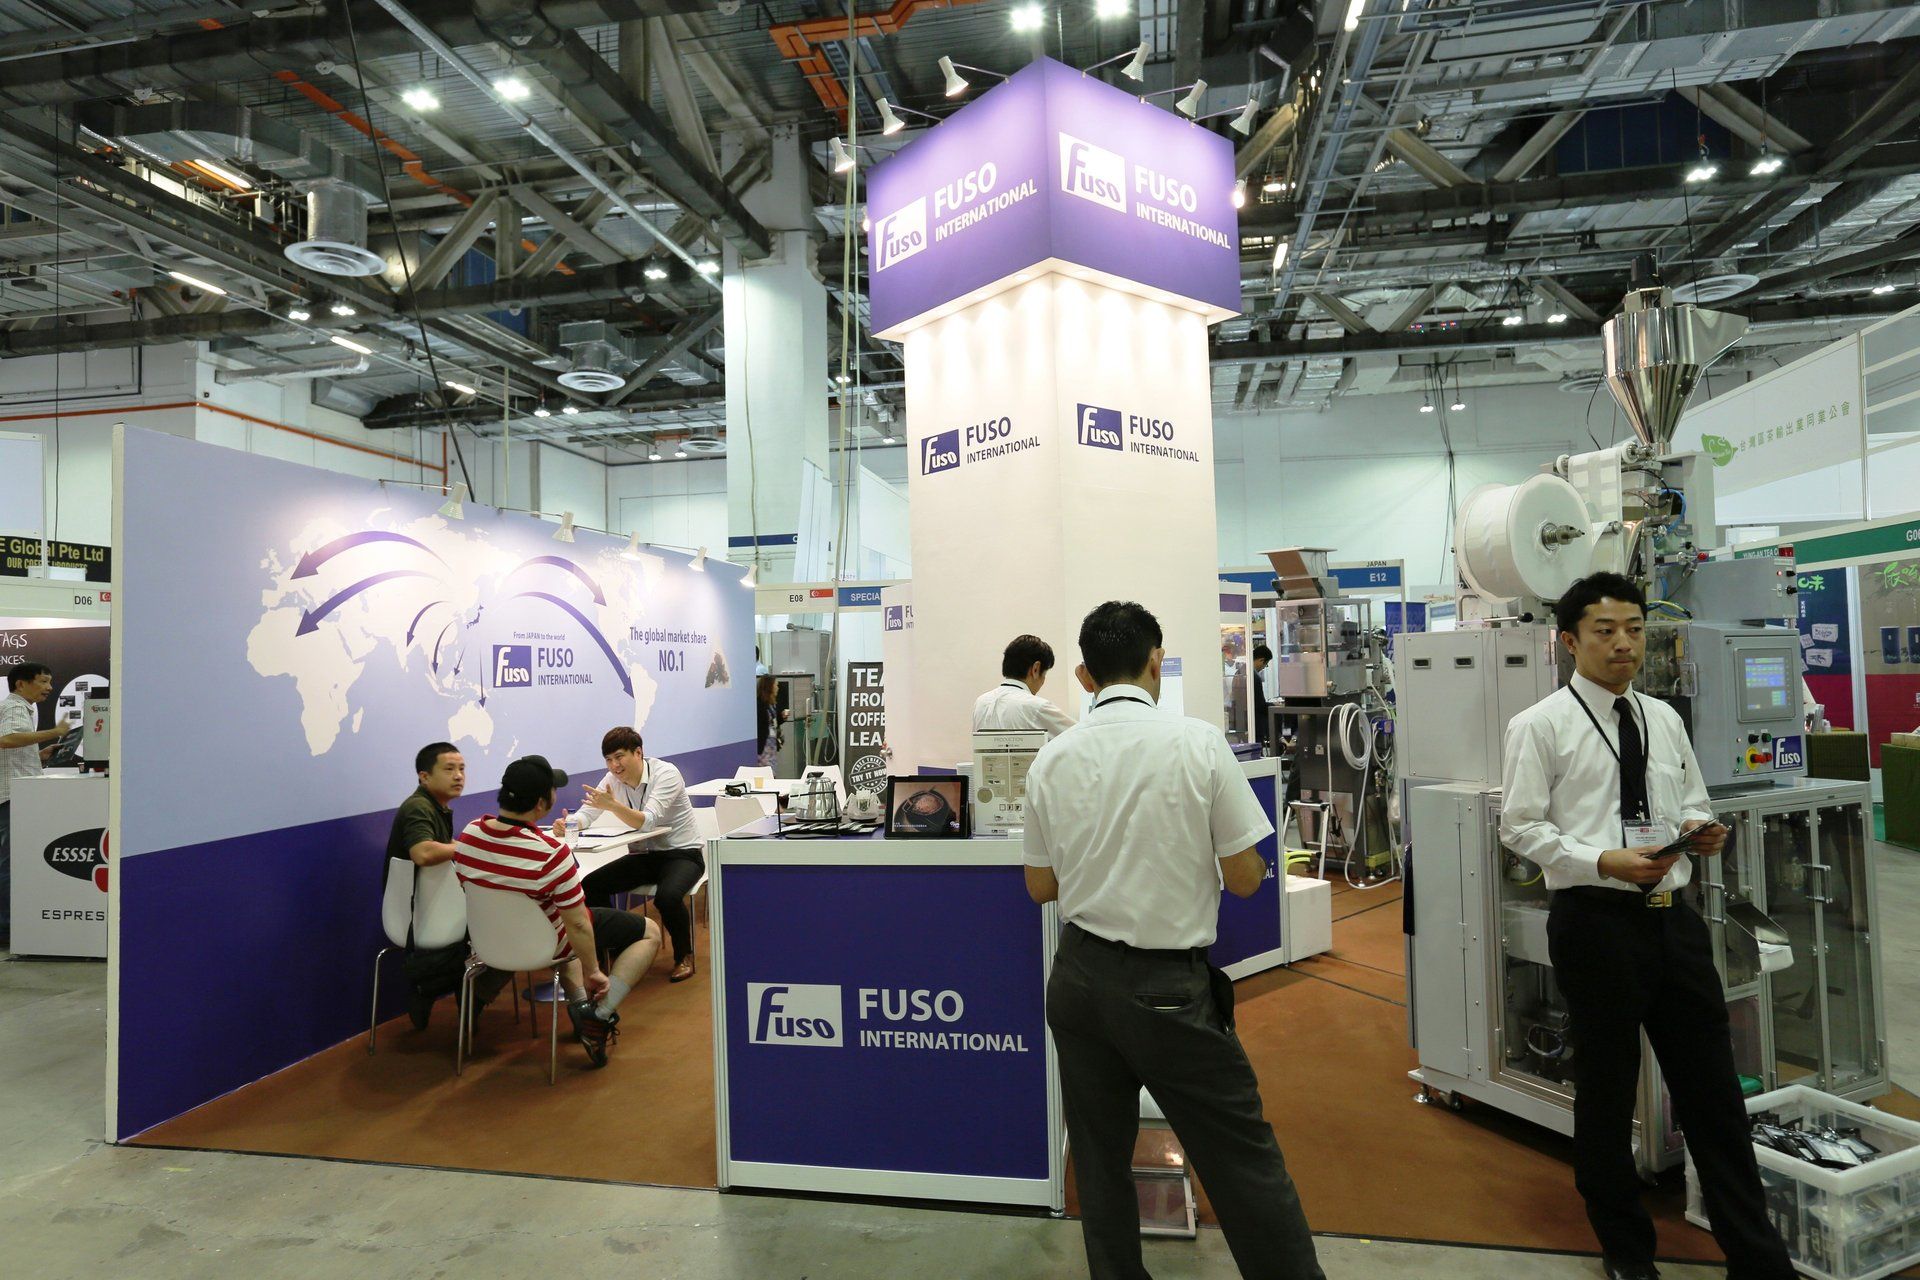 Fuso International @ Cafe Asia 2016. Booth designed and built by Essential Global Fairs.